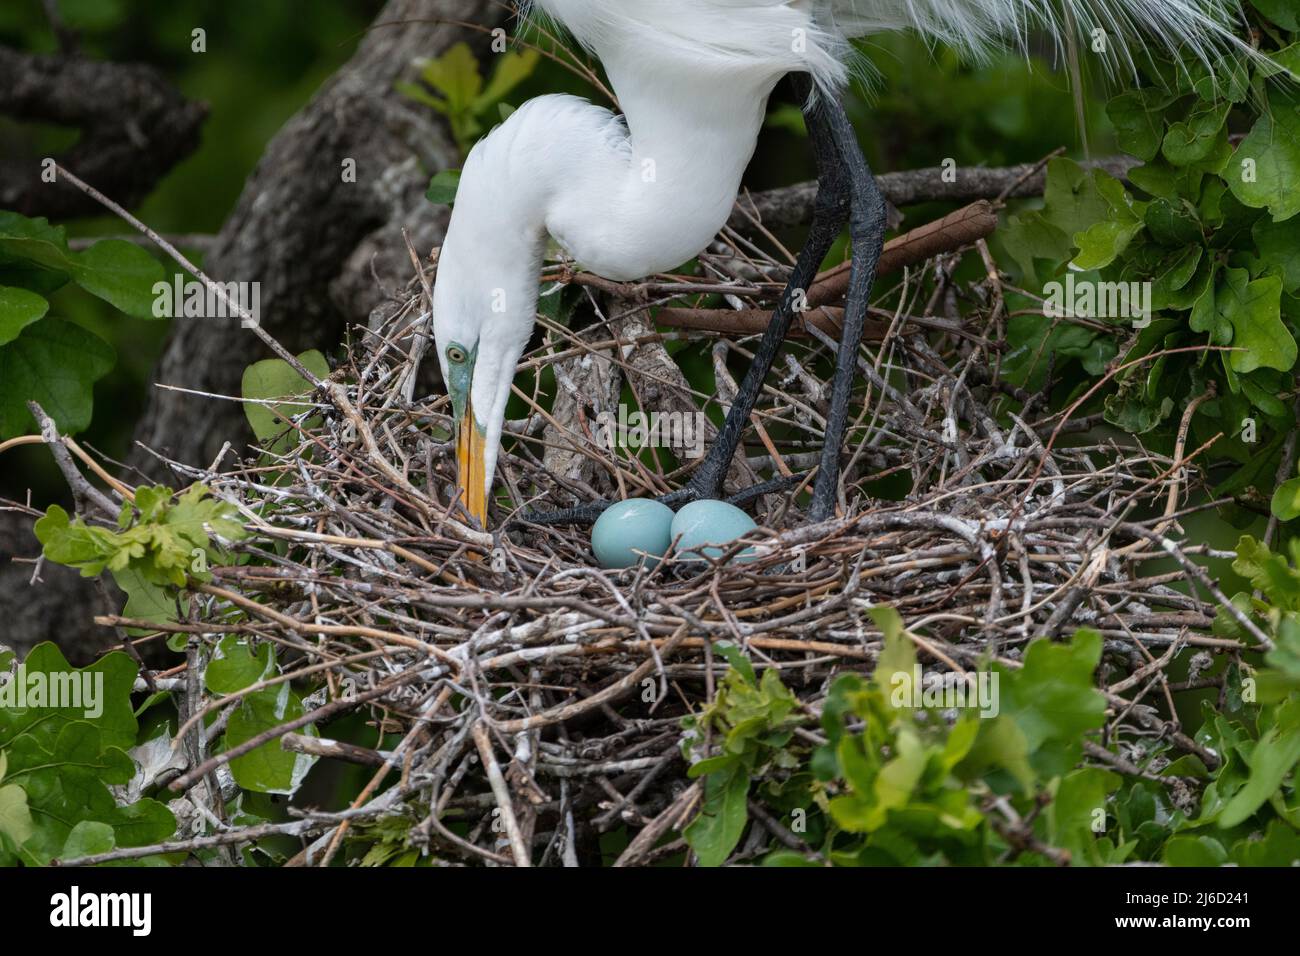 Closeup of a Great White Egret using its powerful beak to tend to a clutch of blue eggs in its nest high in the trees at the UTSWMC Rookery in Dallas, Stock Photo